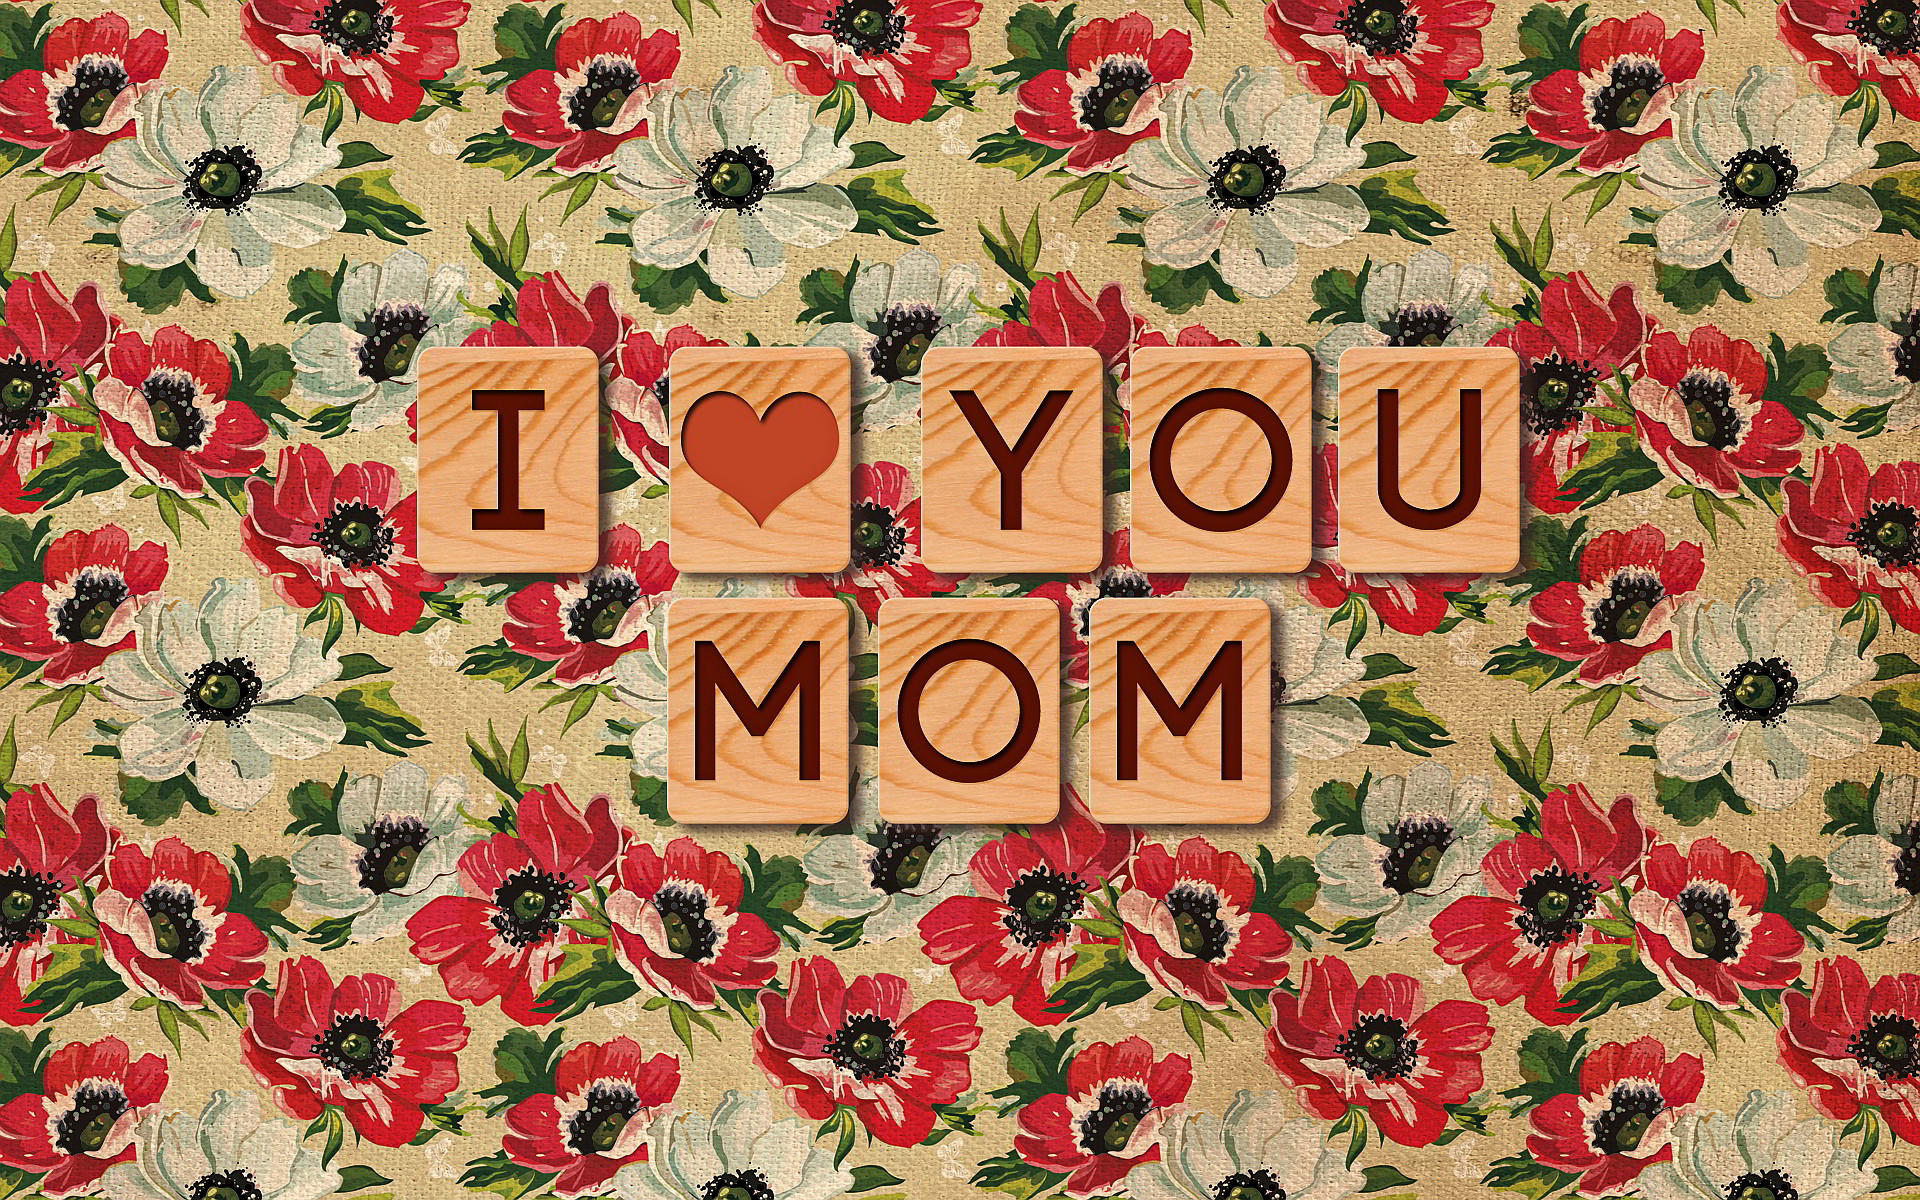 I Love You Mom Wallpapers Images Photos Hd Wallpapers Tumblr Pinterest  Istagram Whatsapp Imo Facebook Twitter – Heart Touching Fashion Summary  Amazon Store